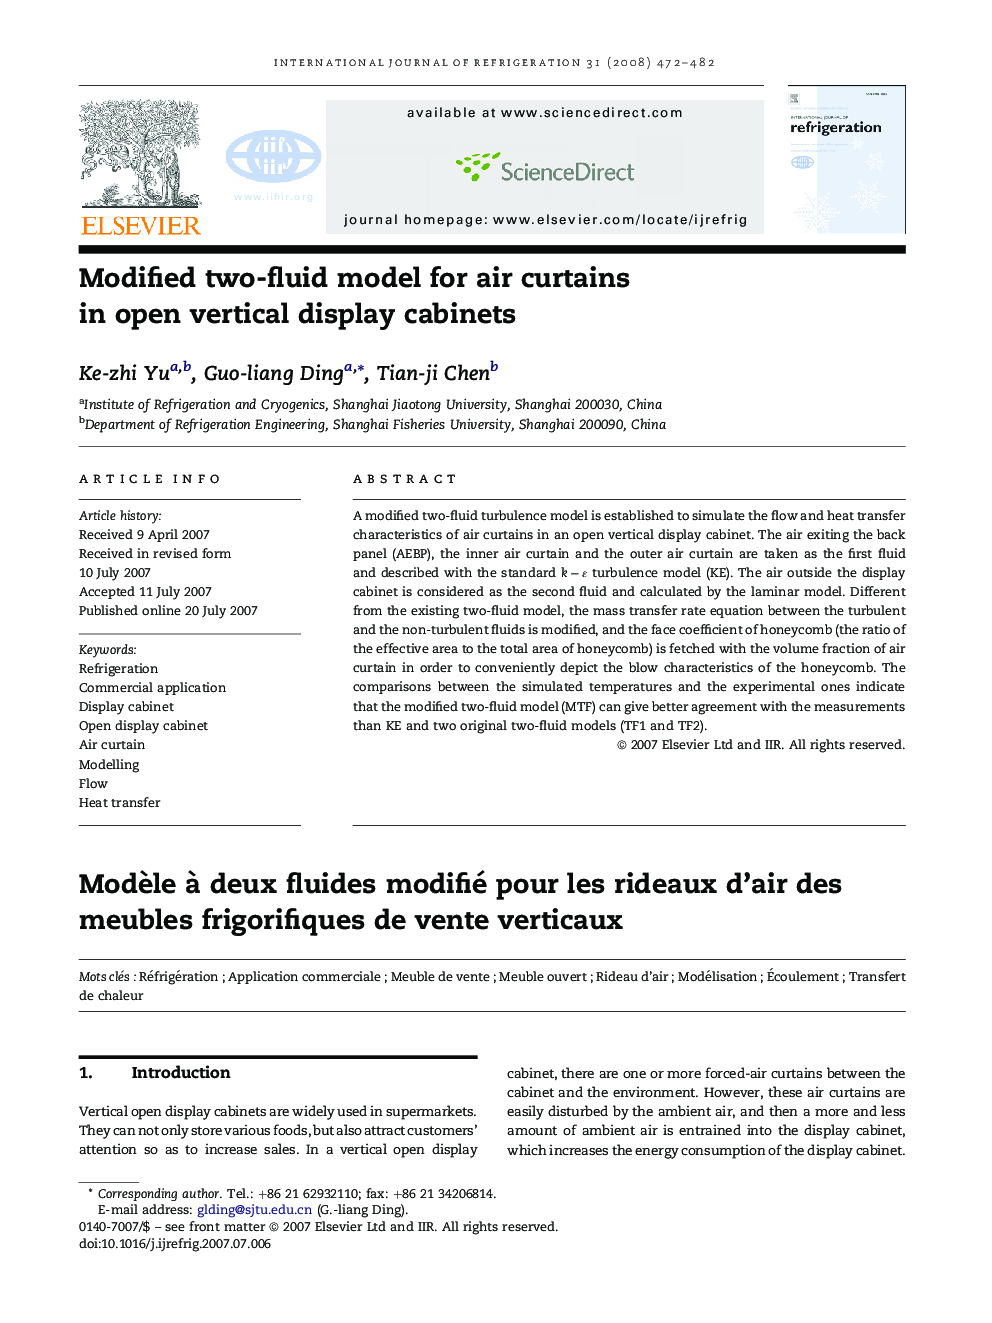 Modified two-fluid model for air curtains in open vertical display cabinets